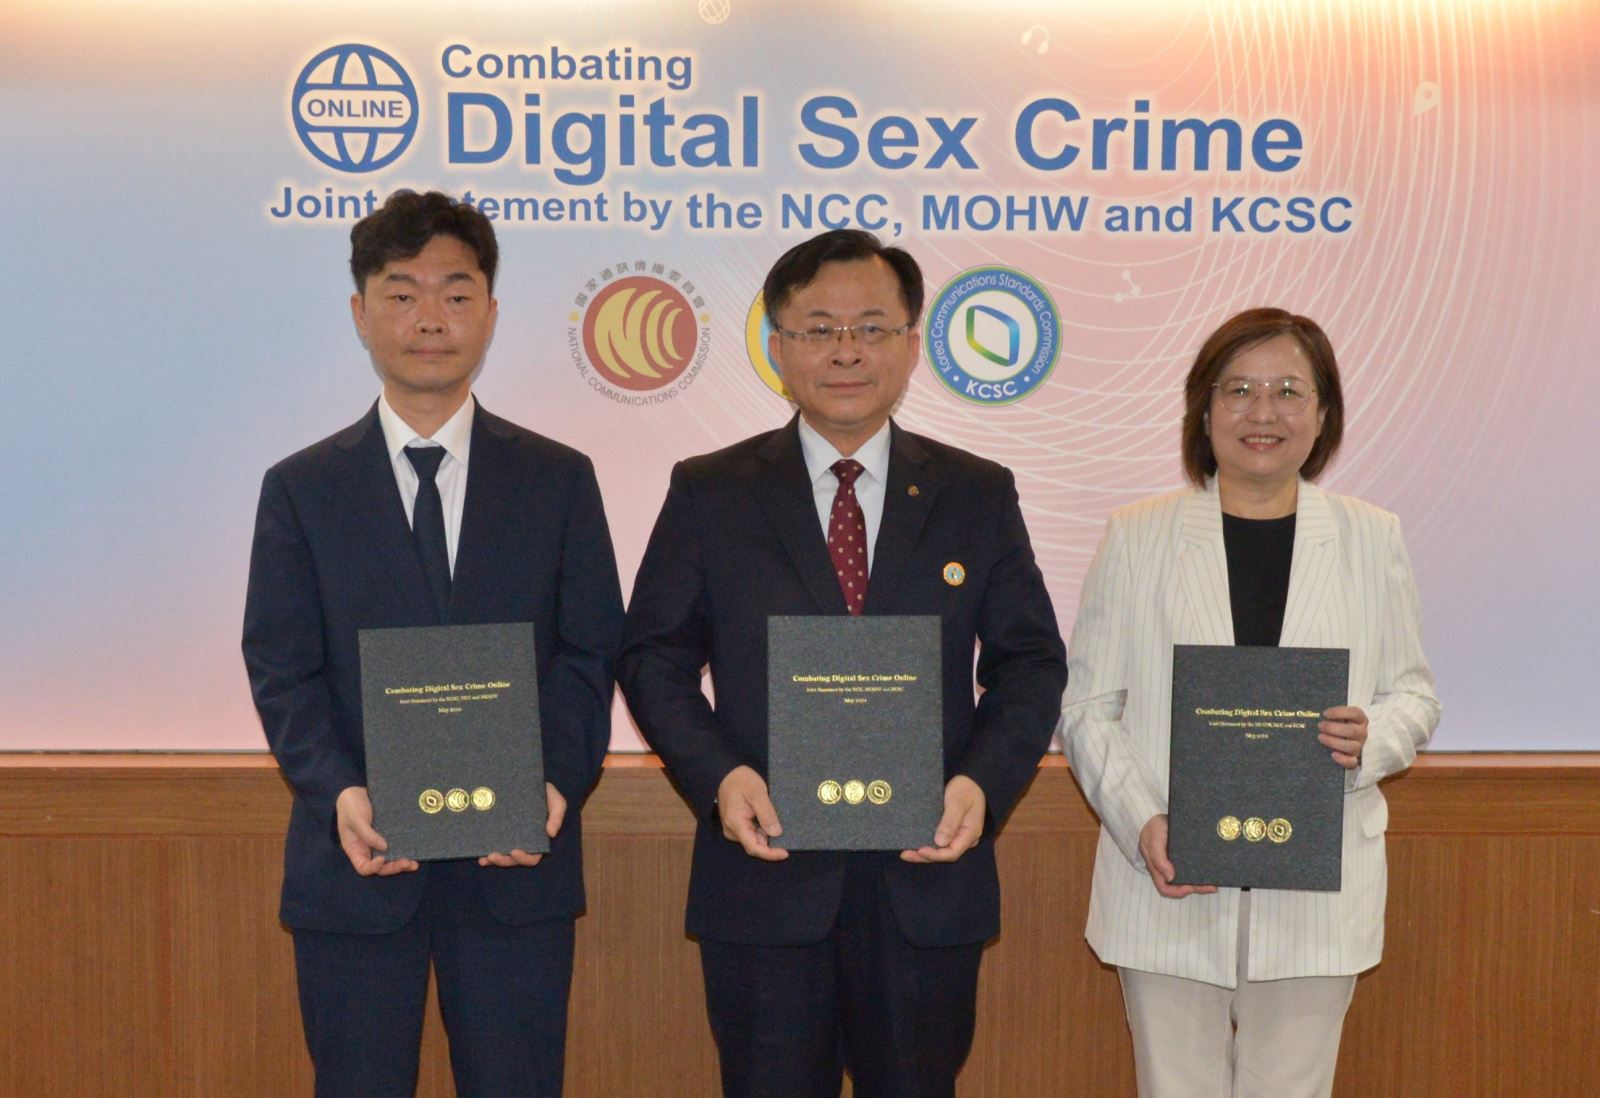 Photo 1: Joint Statement on Combating Digital Sex Crime Online by the NCC, MOHW and KCSC.